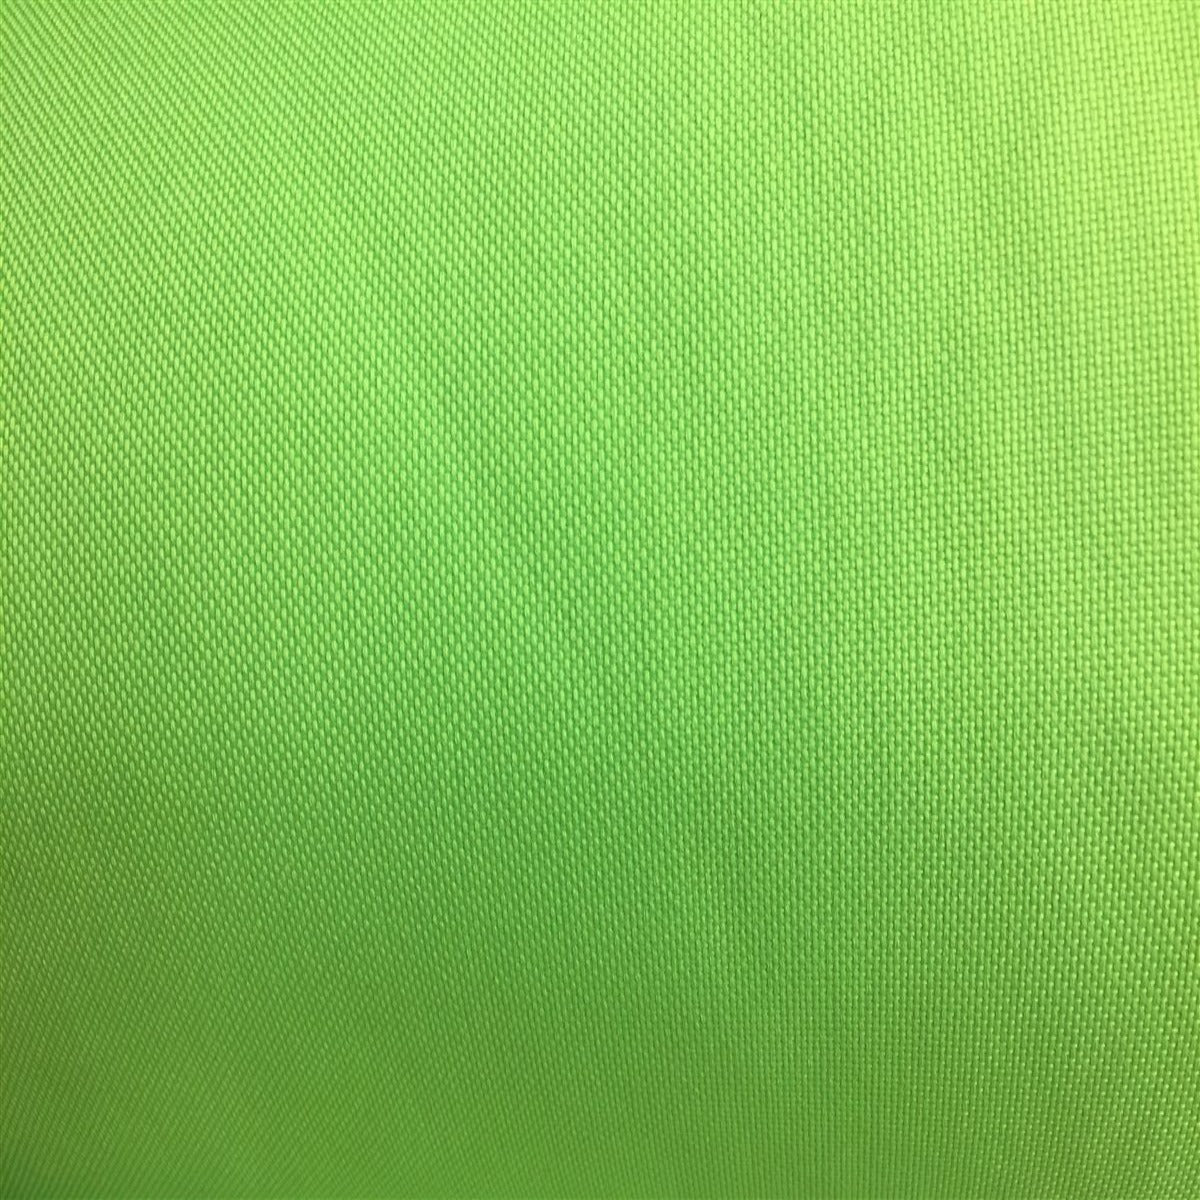 800g army green pvc fabric of